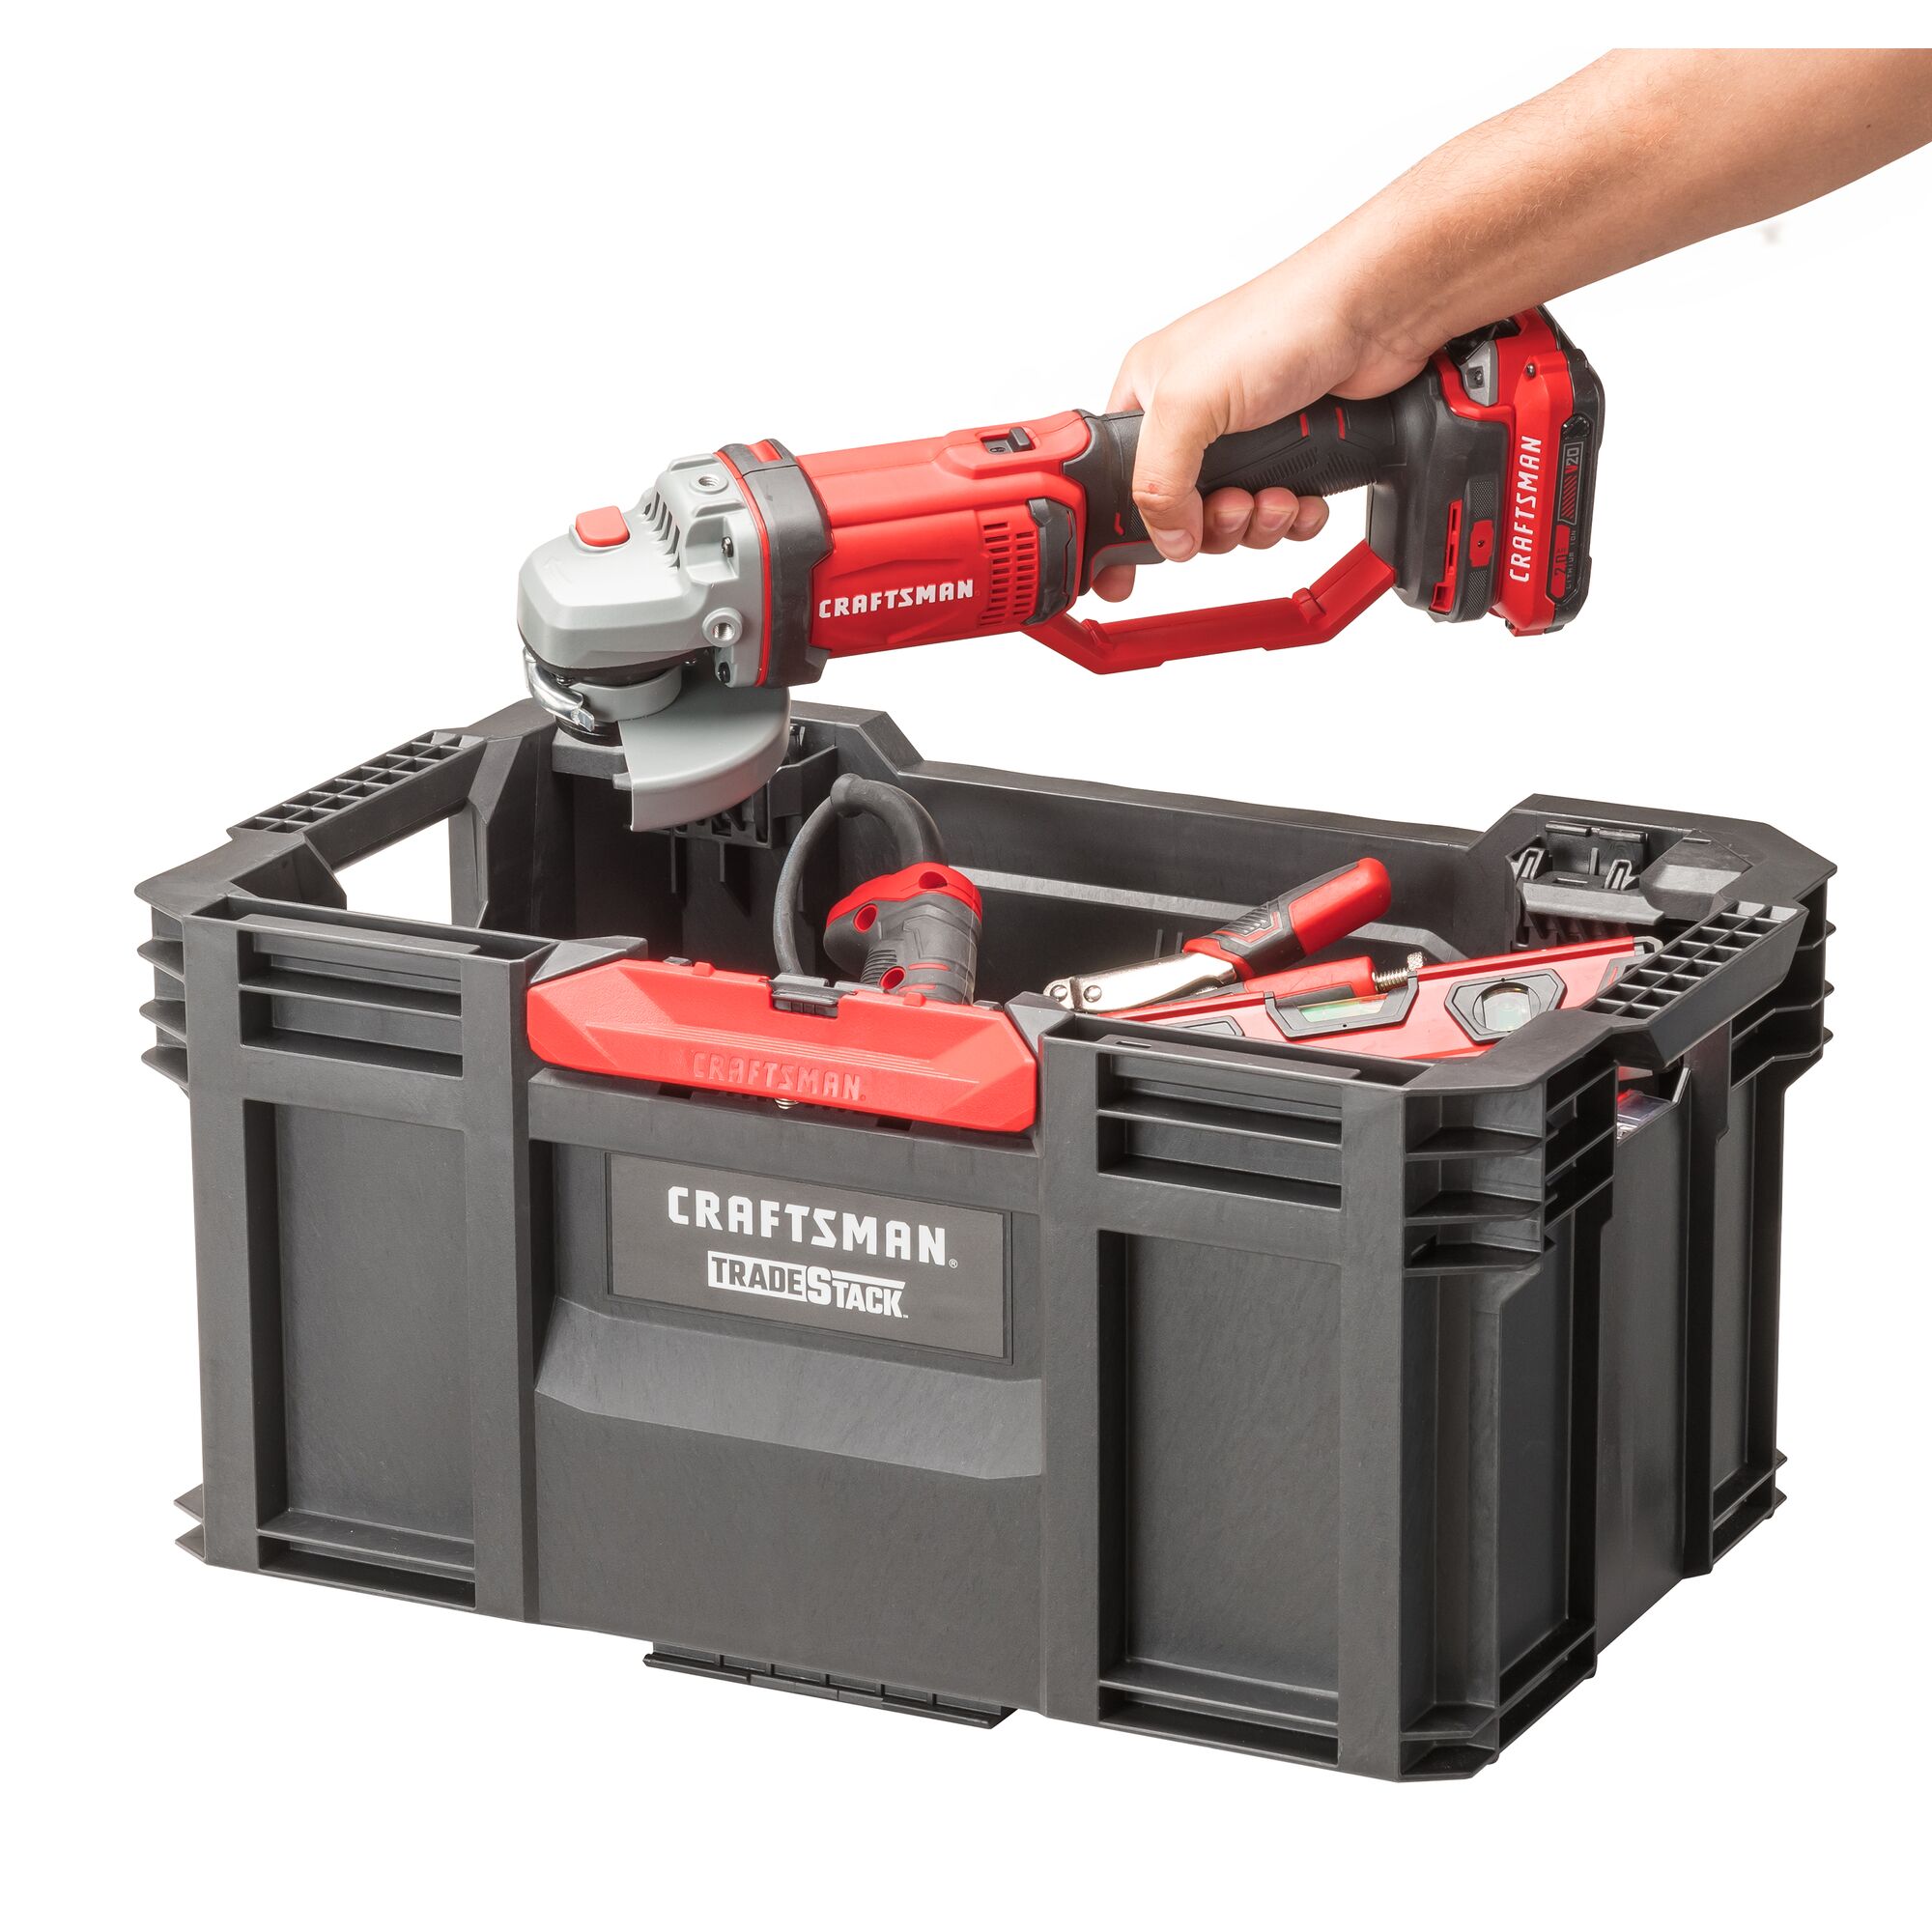 CRAFTSMAN TRADESTACK Tool Crate filled with tools attached on top of a TRADESTACK Rolling Unit, with hands placing a TRADESTACK Suitcase on top